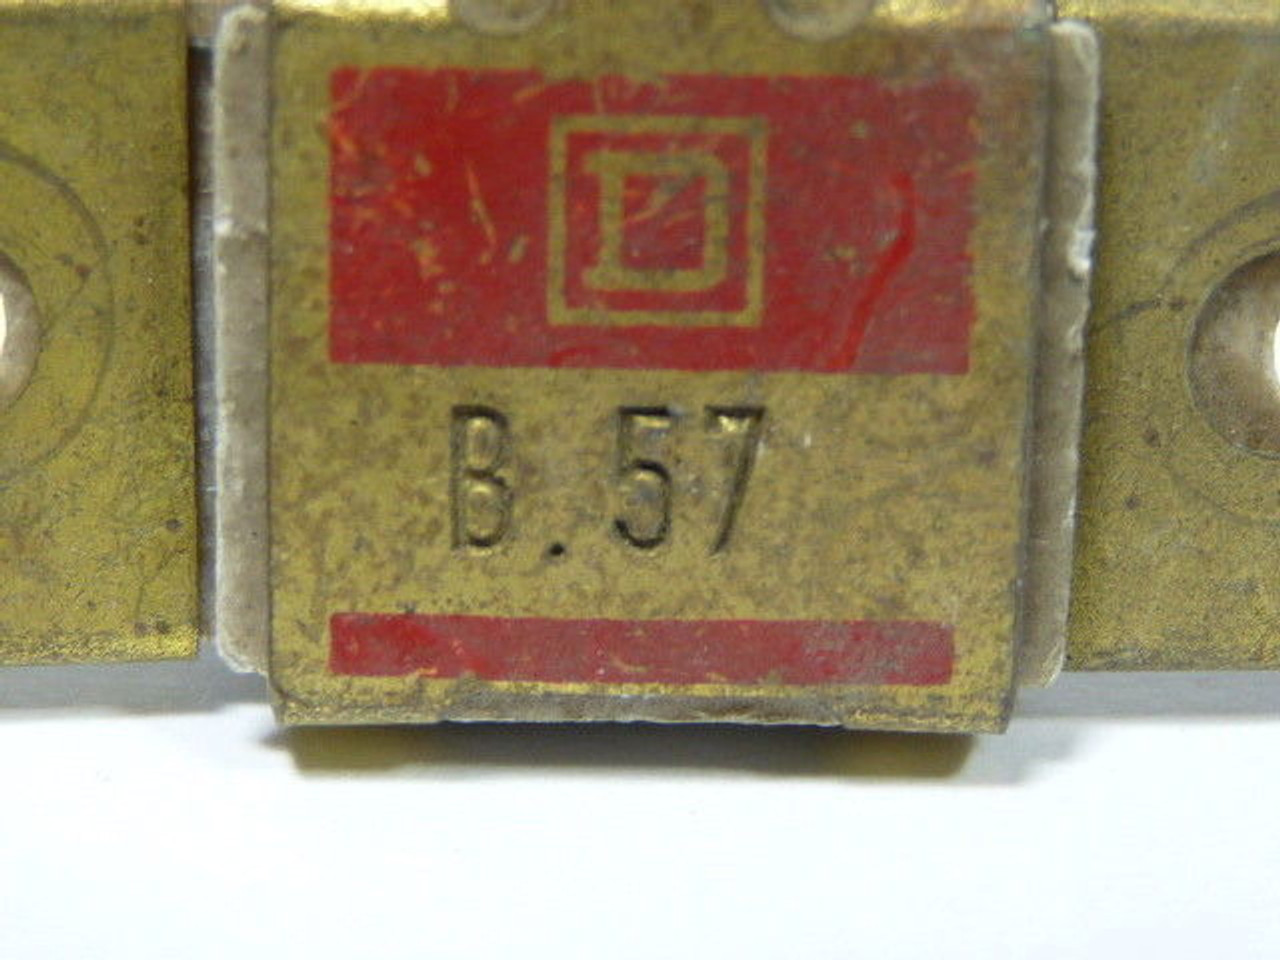 Square D B0.57 Overload Relay Thermal Unit USED